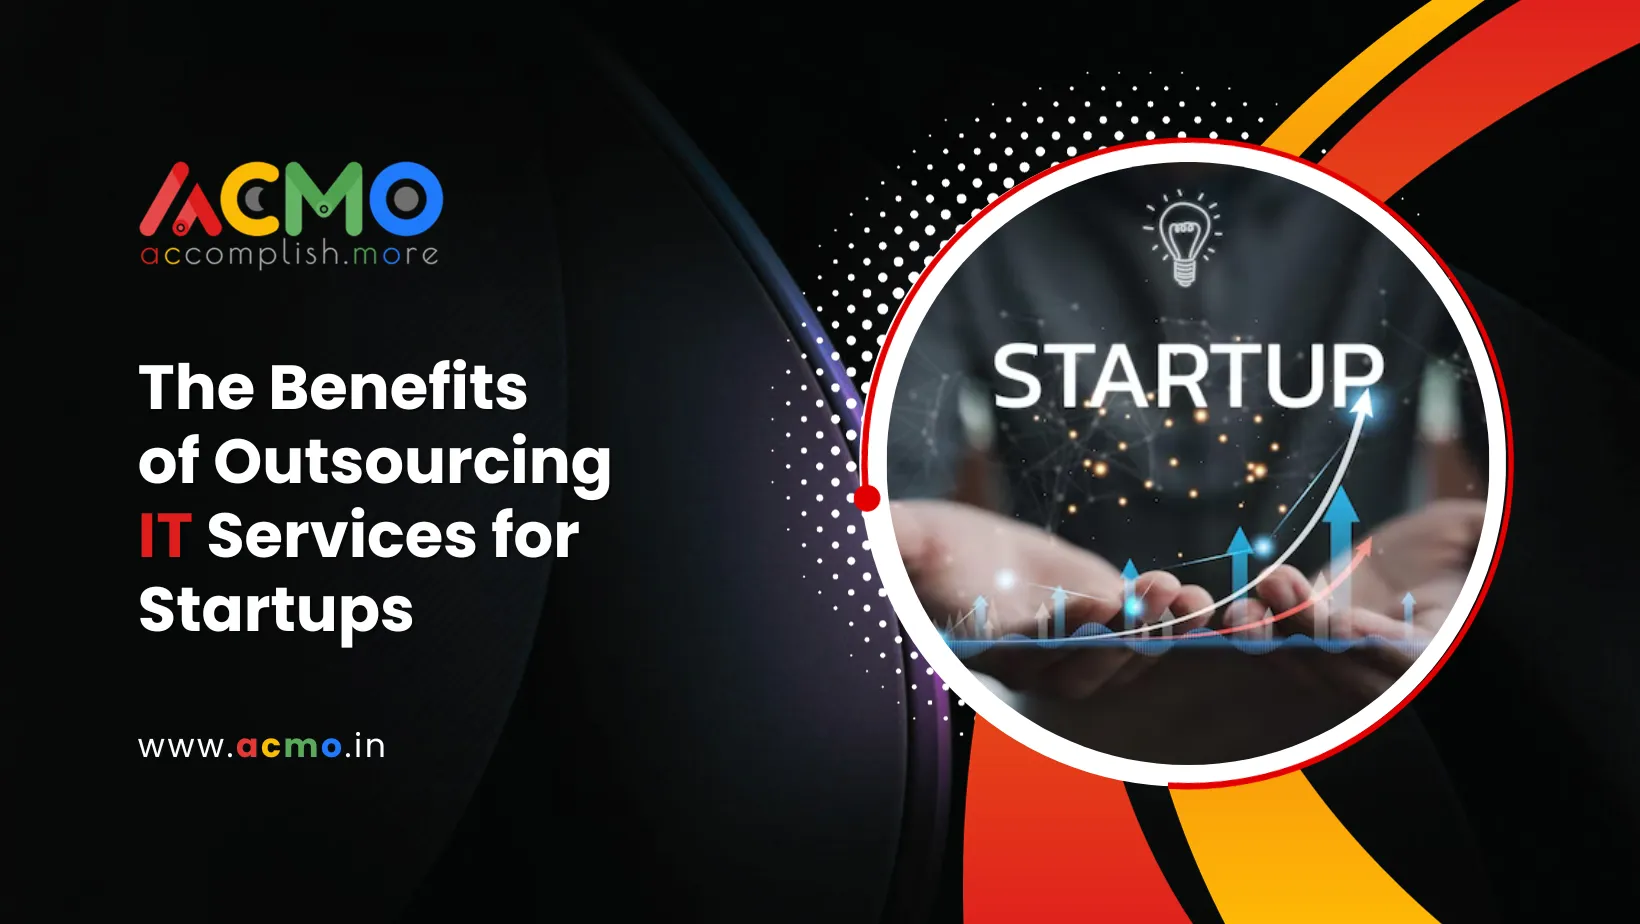 The Benefits of Outsourcing IT Services for Startups